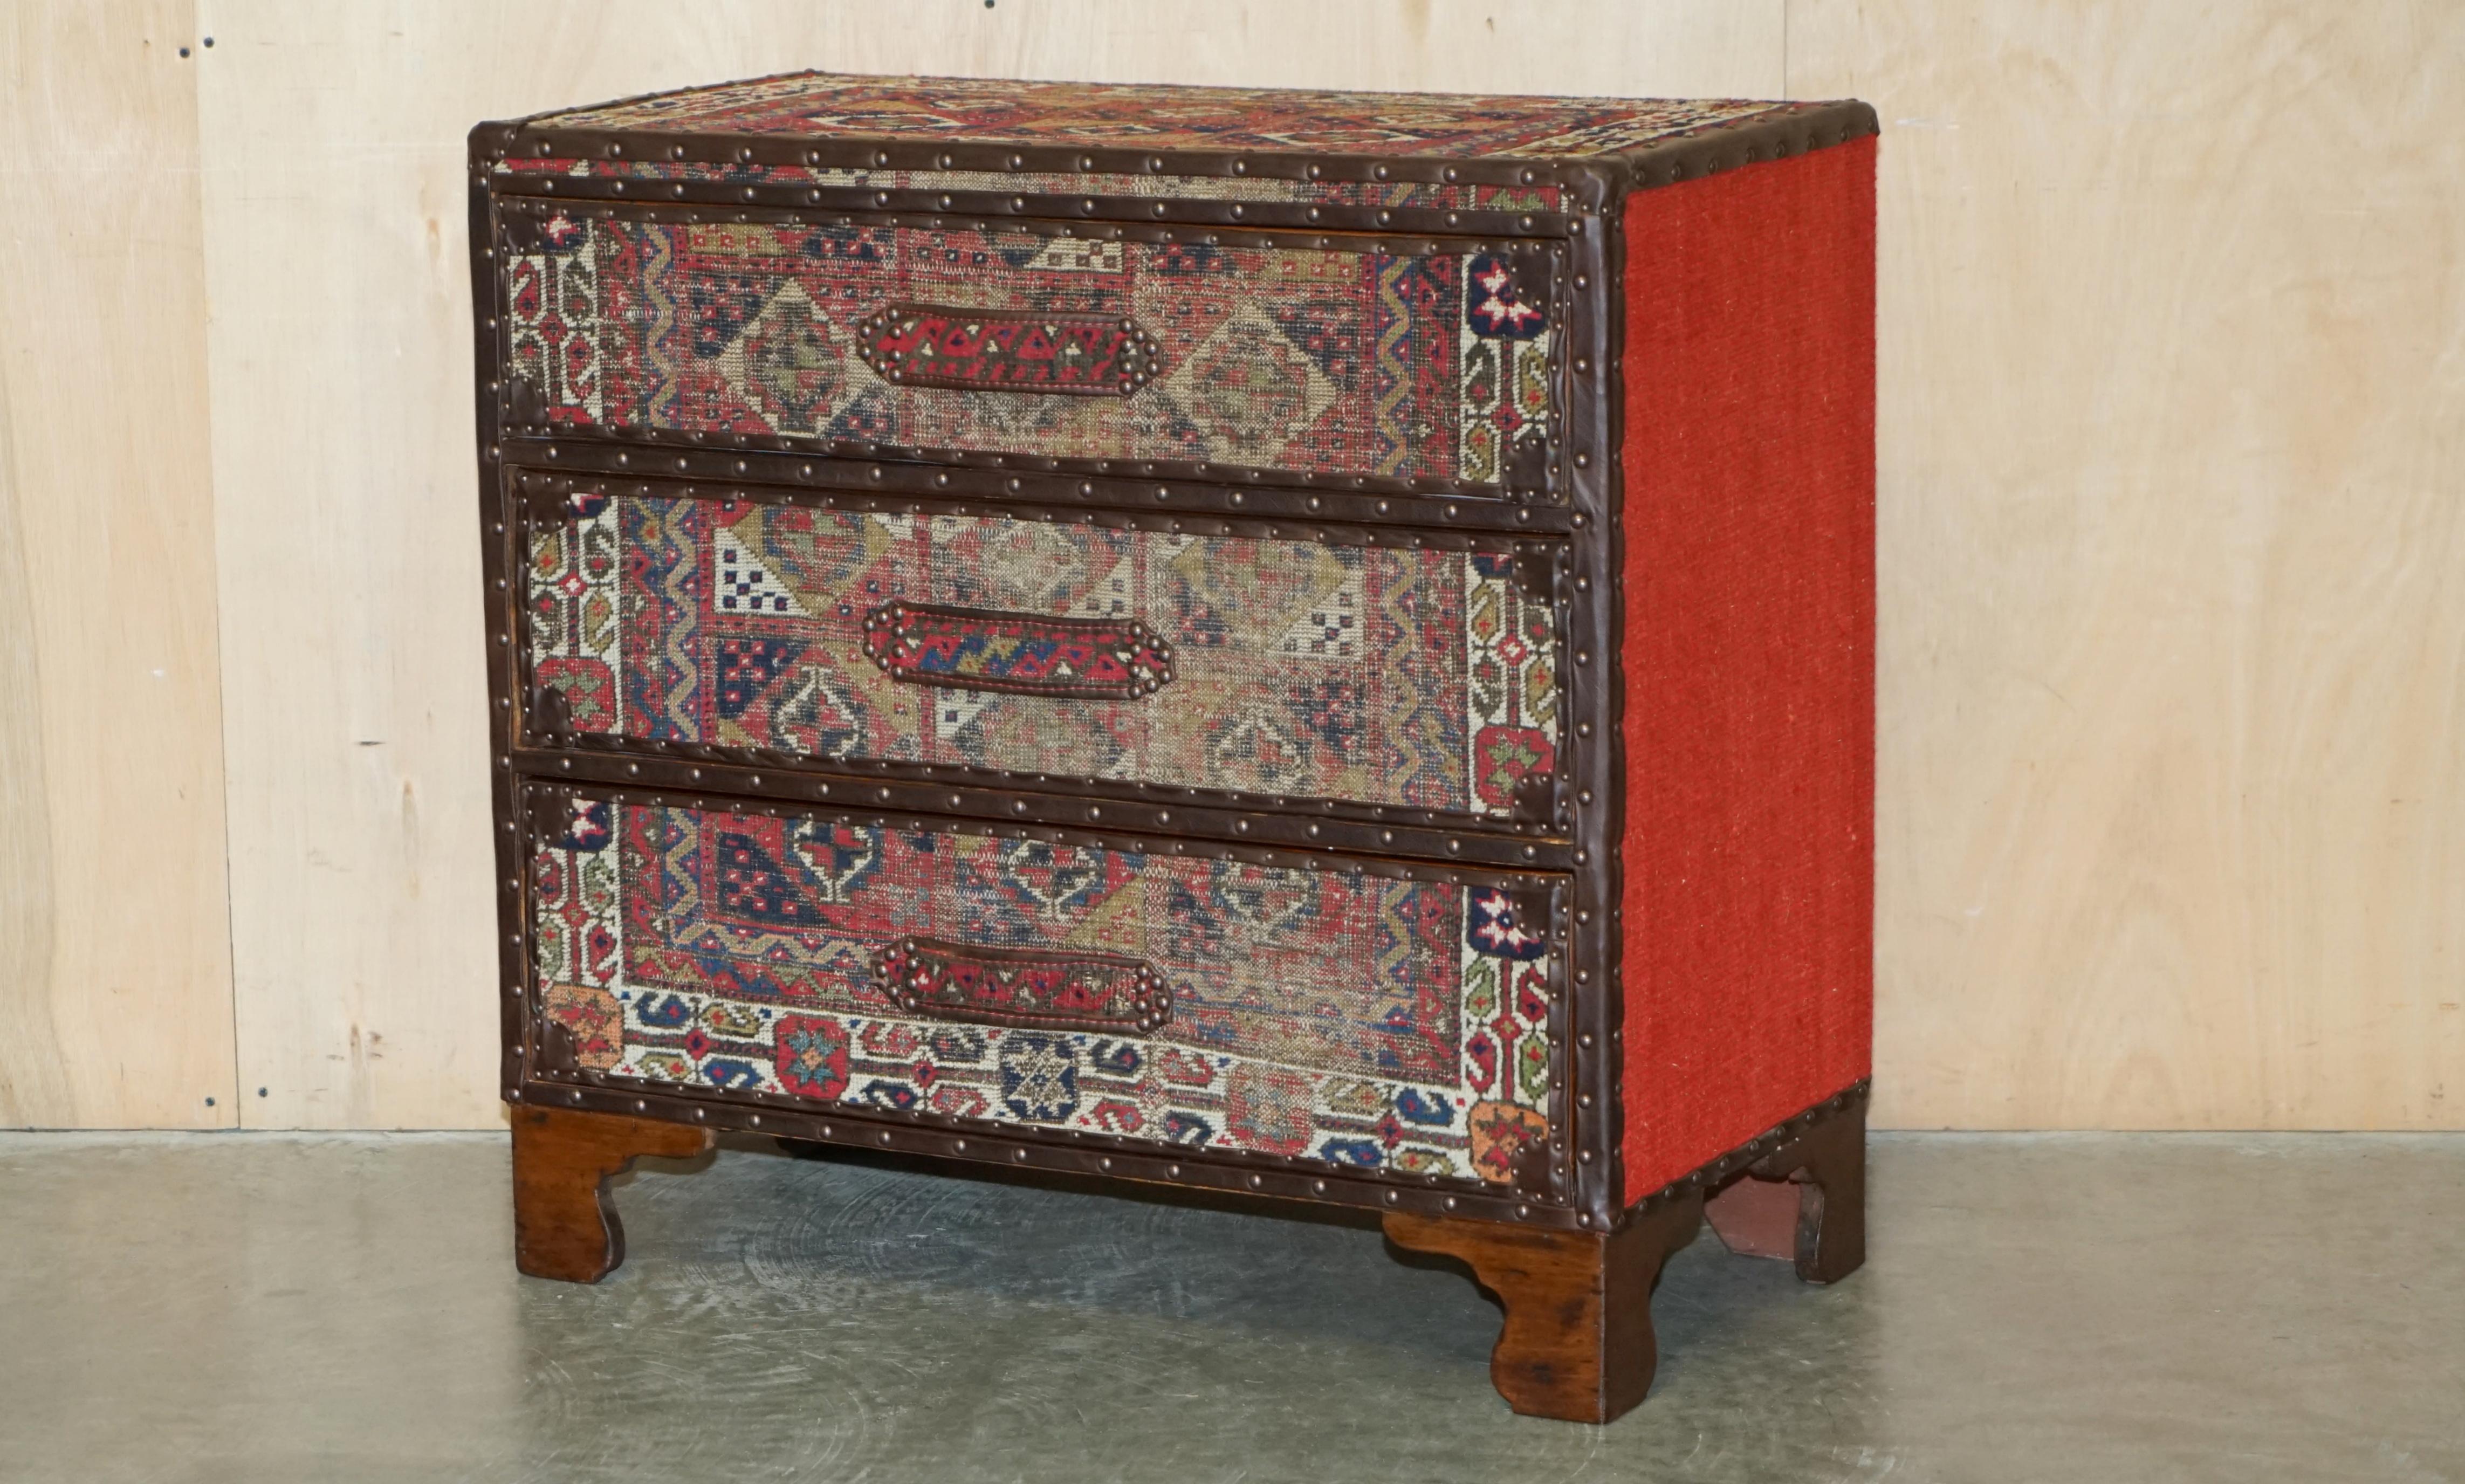 Royal House Antiques

Royal House Antiques is delighted to offer for sale this very rare and highly collatable Victorian brown leather and Kilim upholstered chest of drawers 

Please note the delivery fee listed covers within the M25 only for the